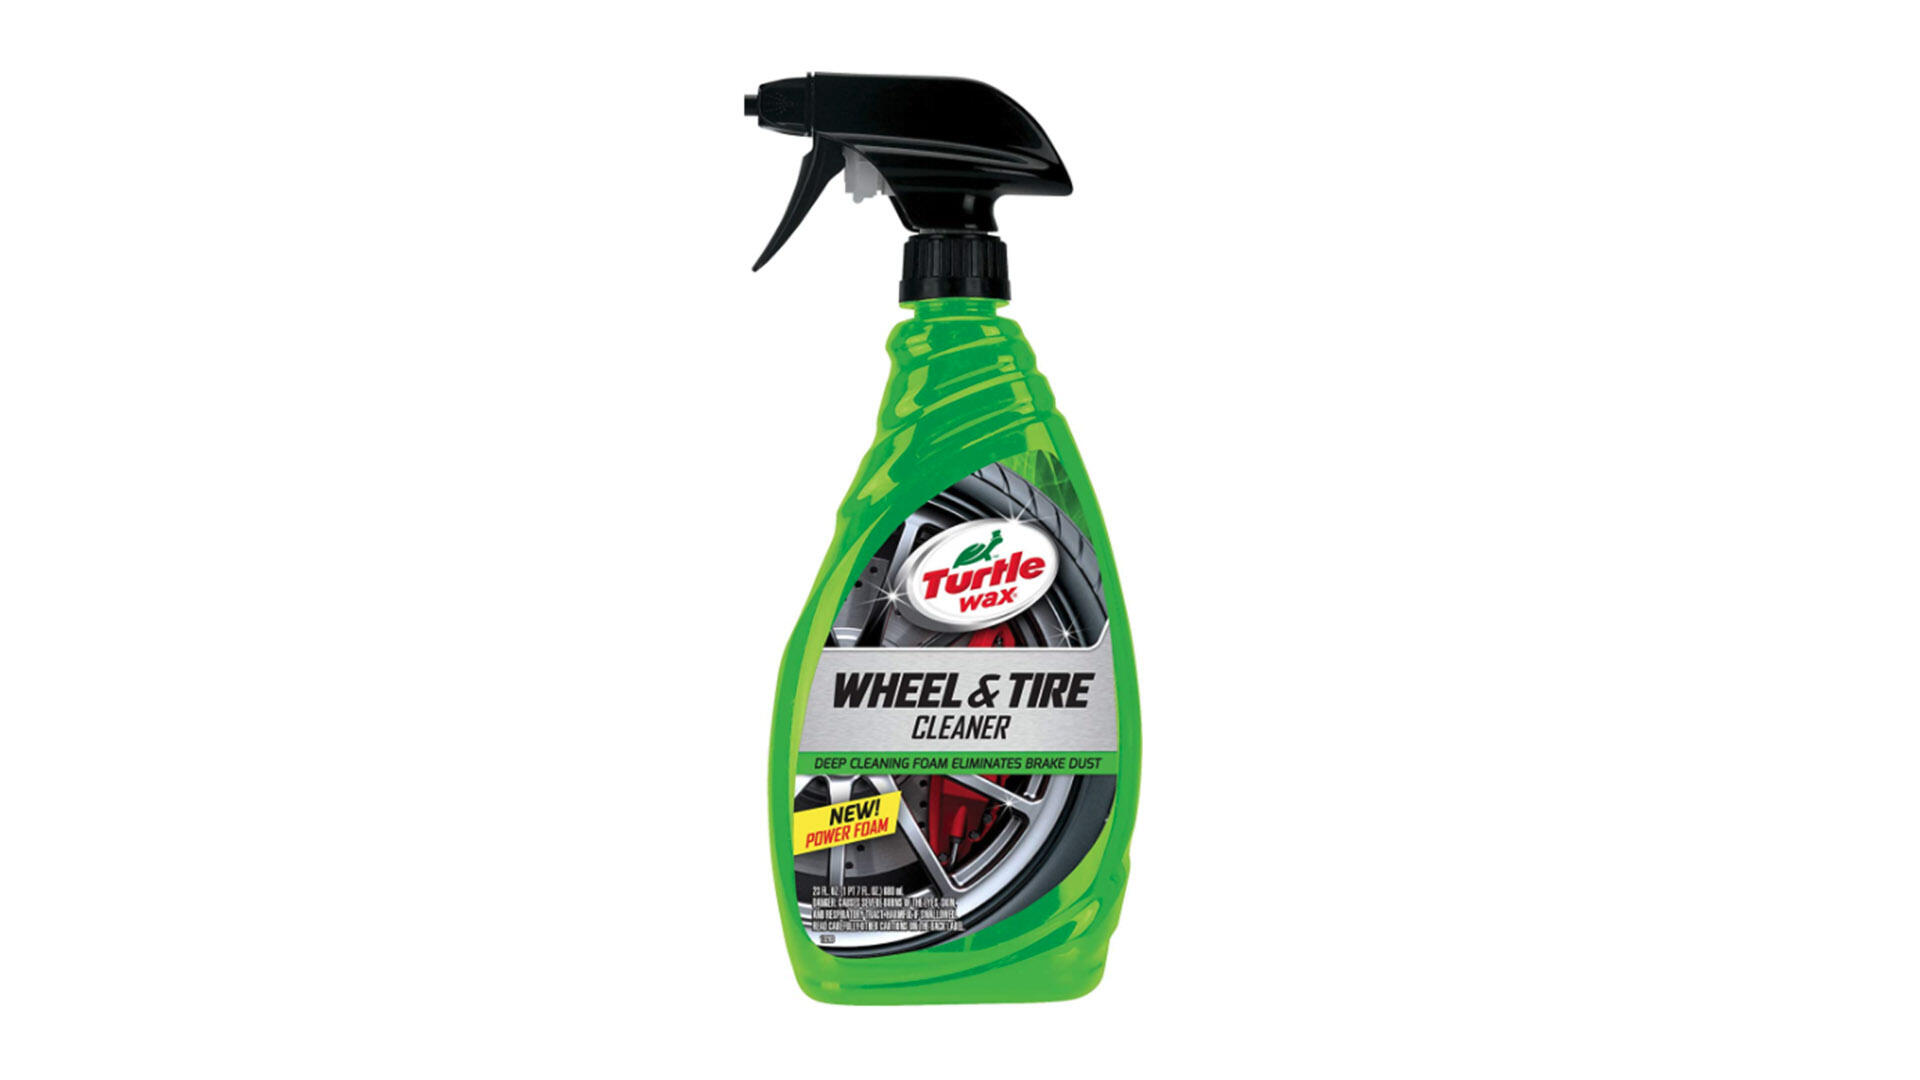 Professional Wheel Cleaner Applicable on Chevrolet Wheels